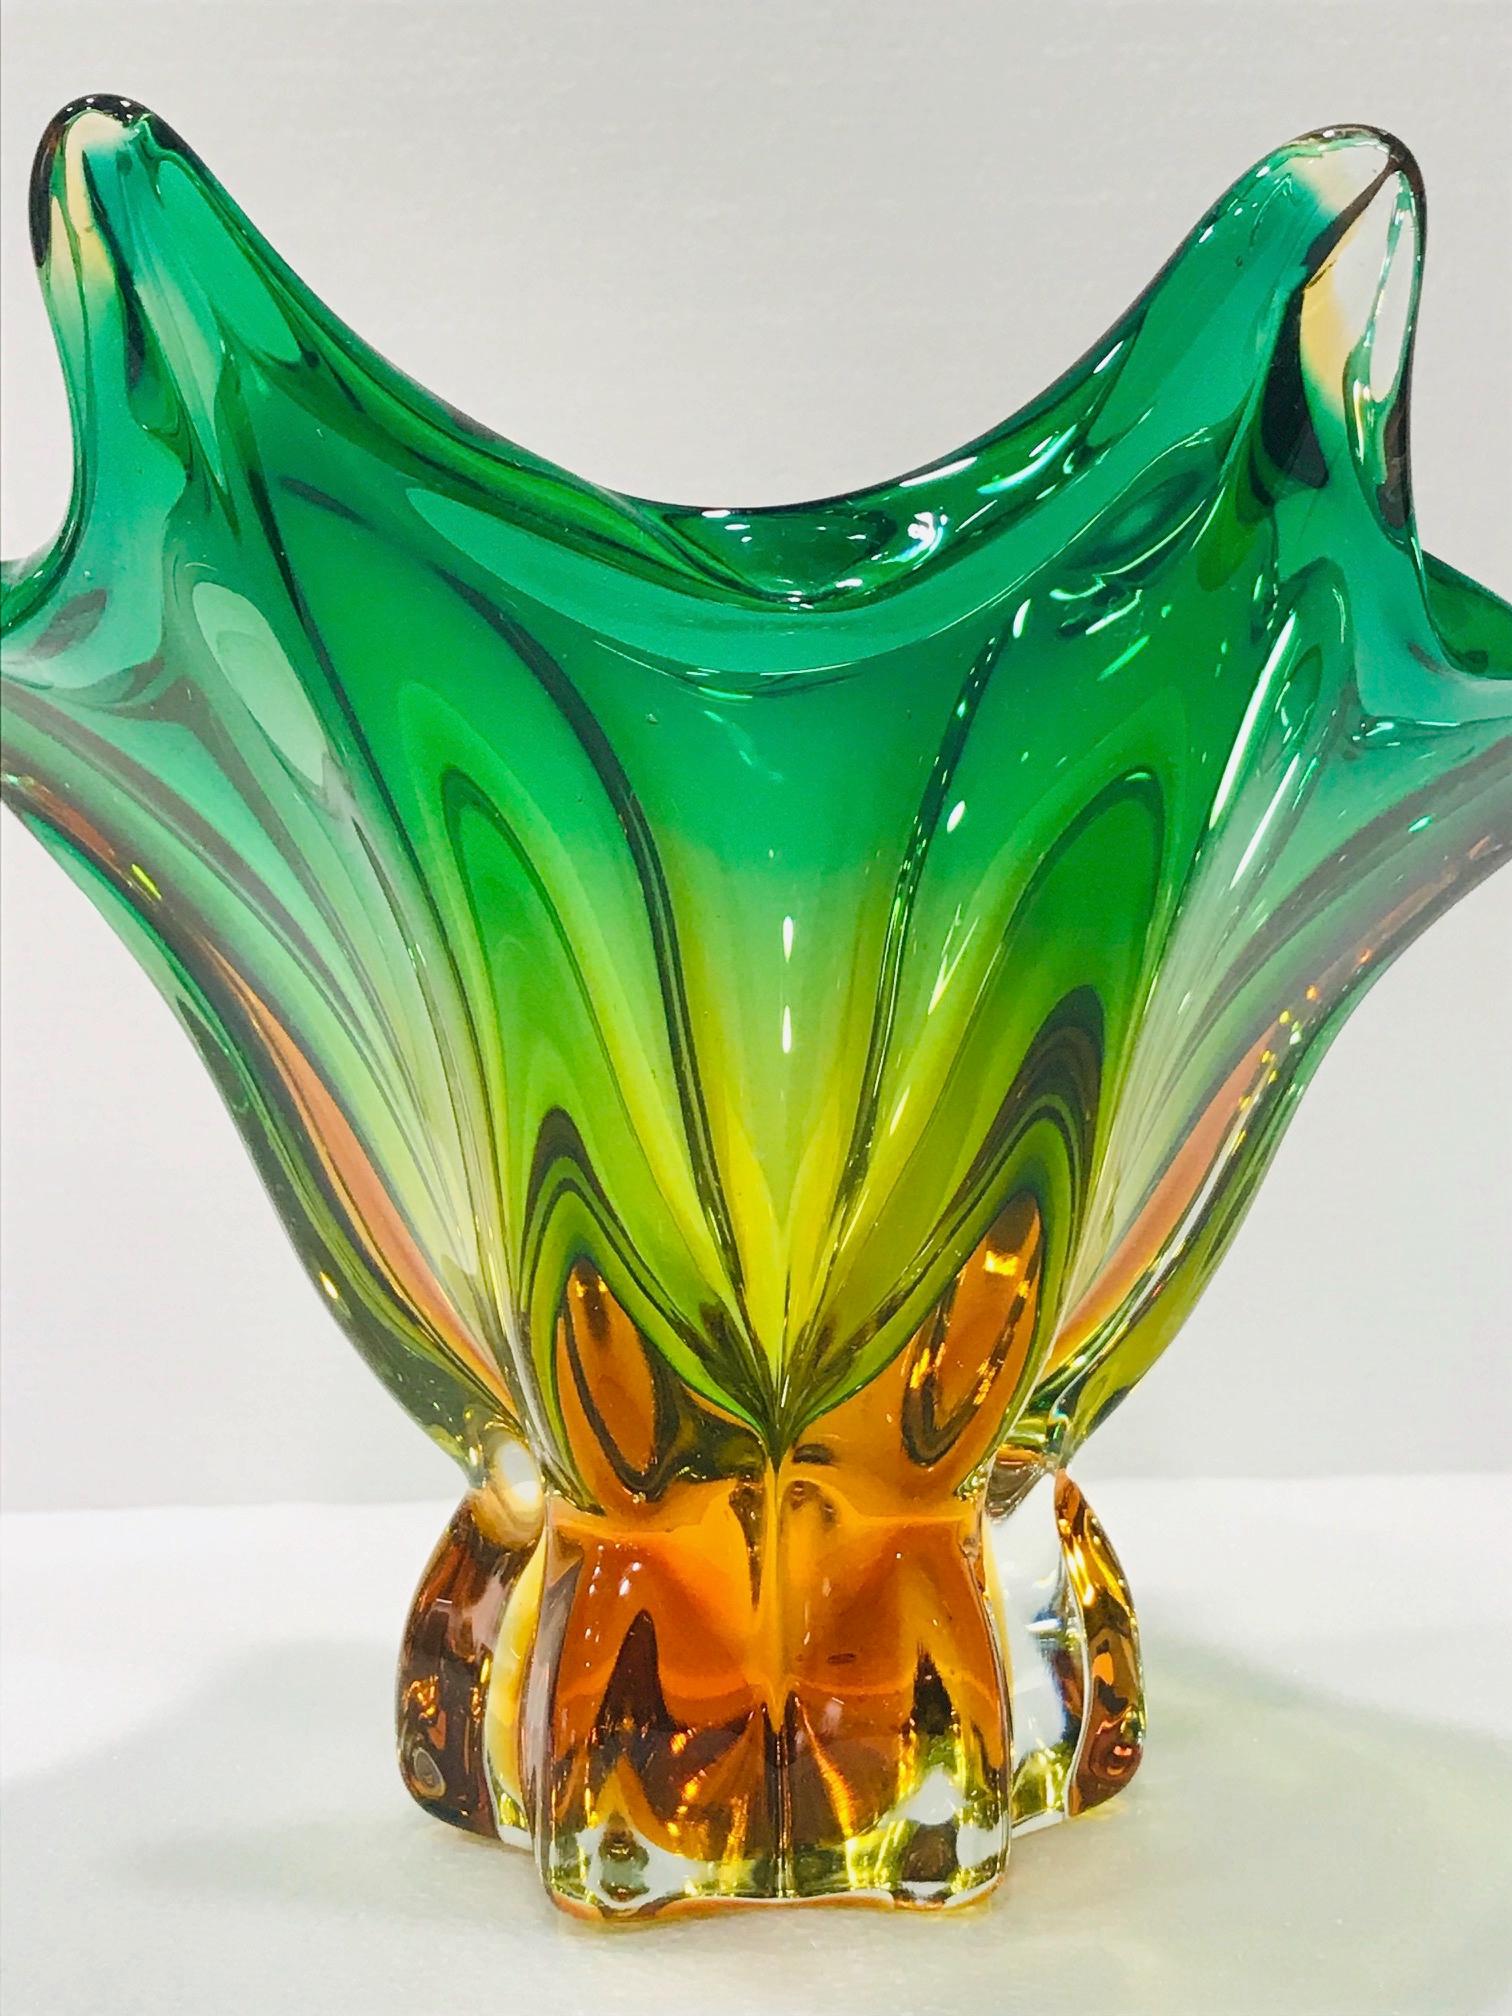 Mid-20th Century Mid-Century Modern Abstract Murano Glass Vase in Green and Gold, Italy c. 1950s